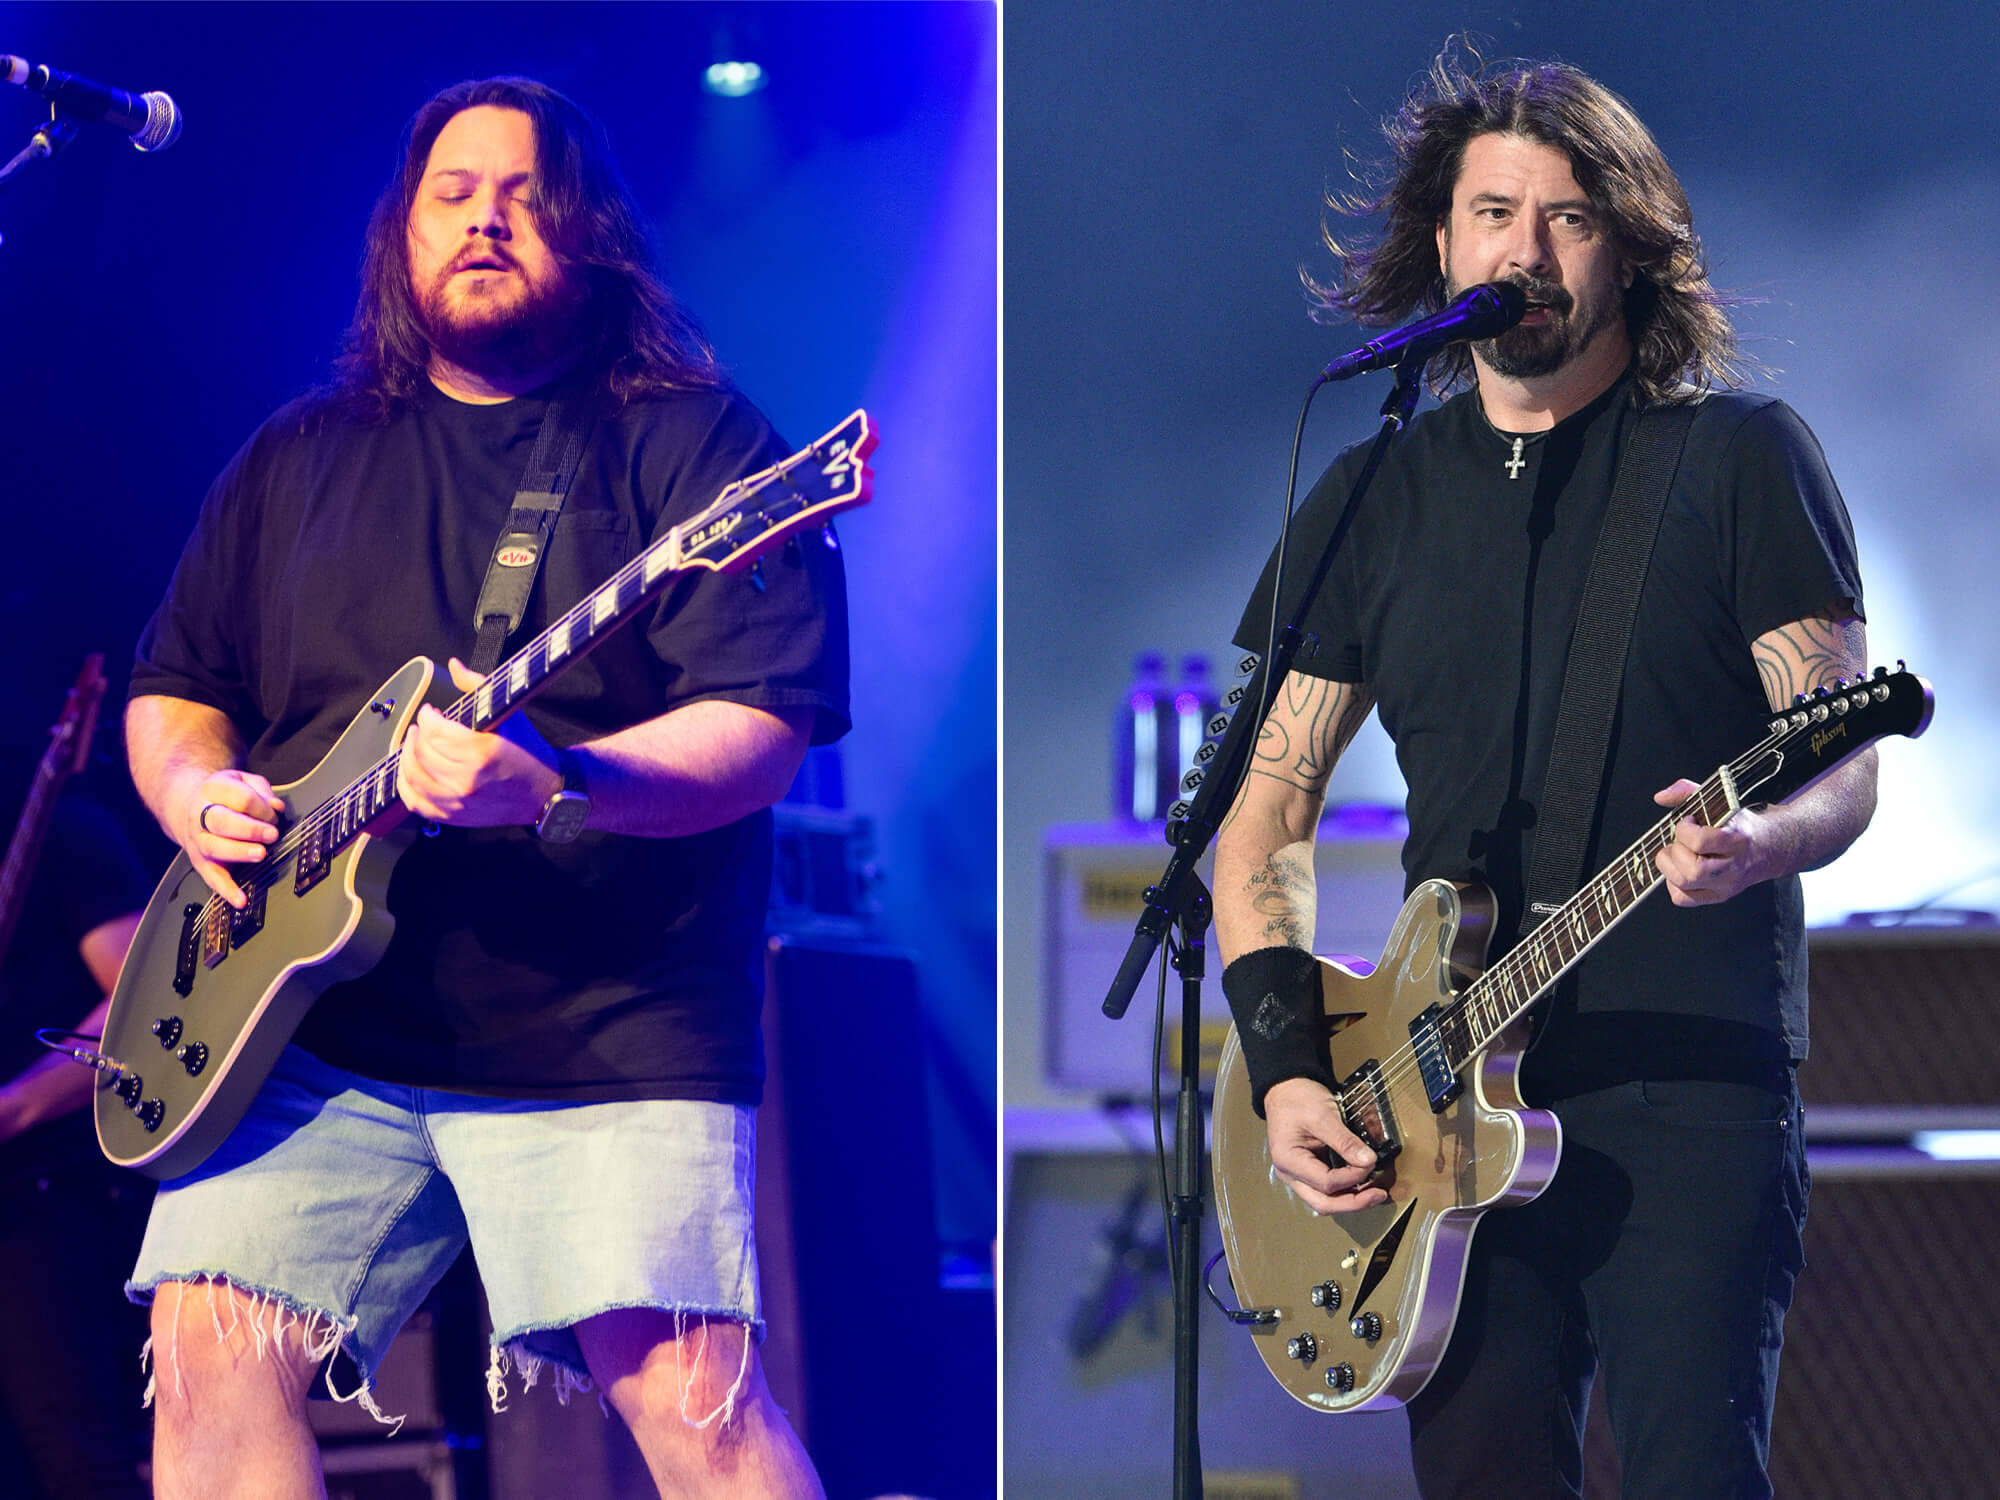 Wolfgang Van Halen (left) Dave Grohl (right) on stage, both with guitars in hand